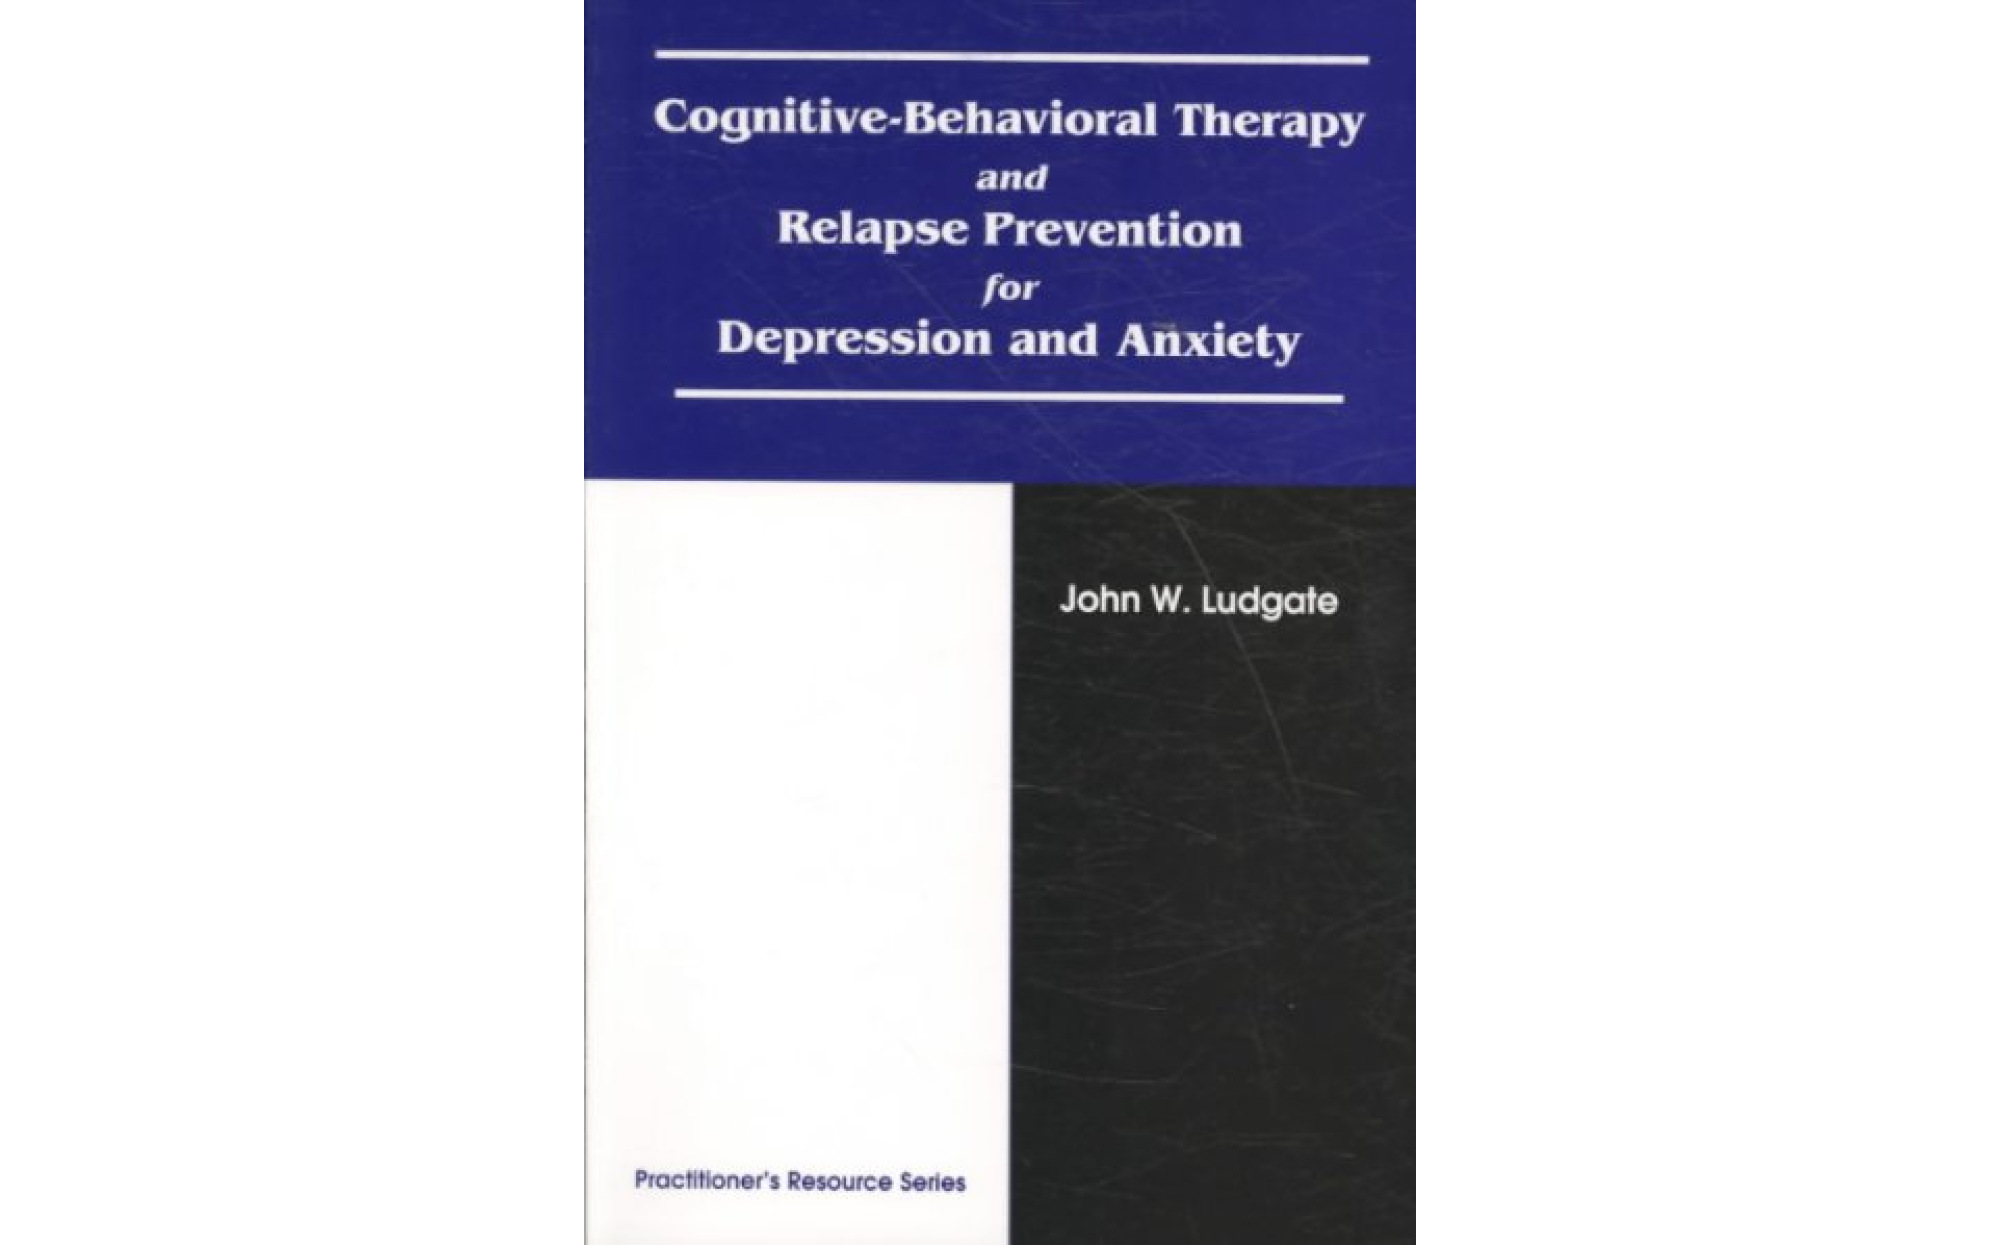 Relapse　Therapy　–　Behavioral　Cognitive　Depression　Anxiety　and　and　for　Prevention　Books